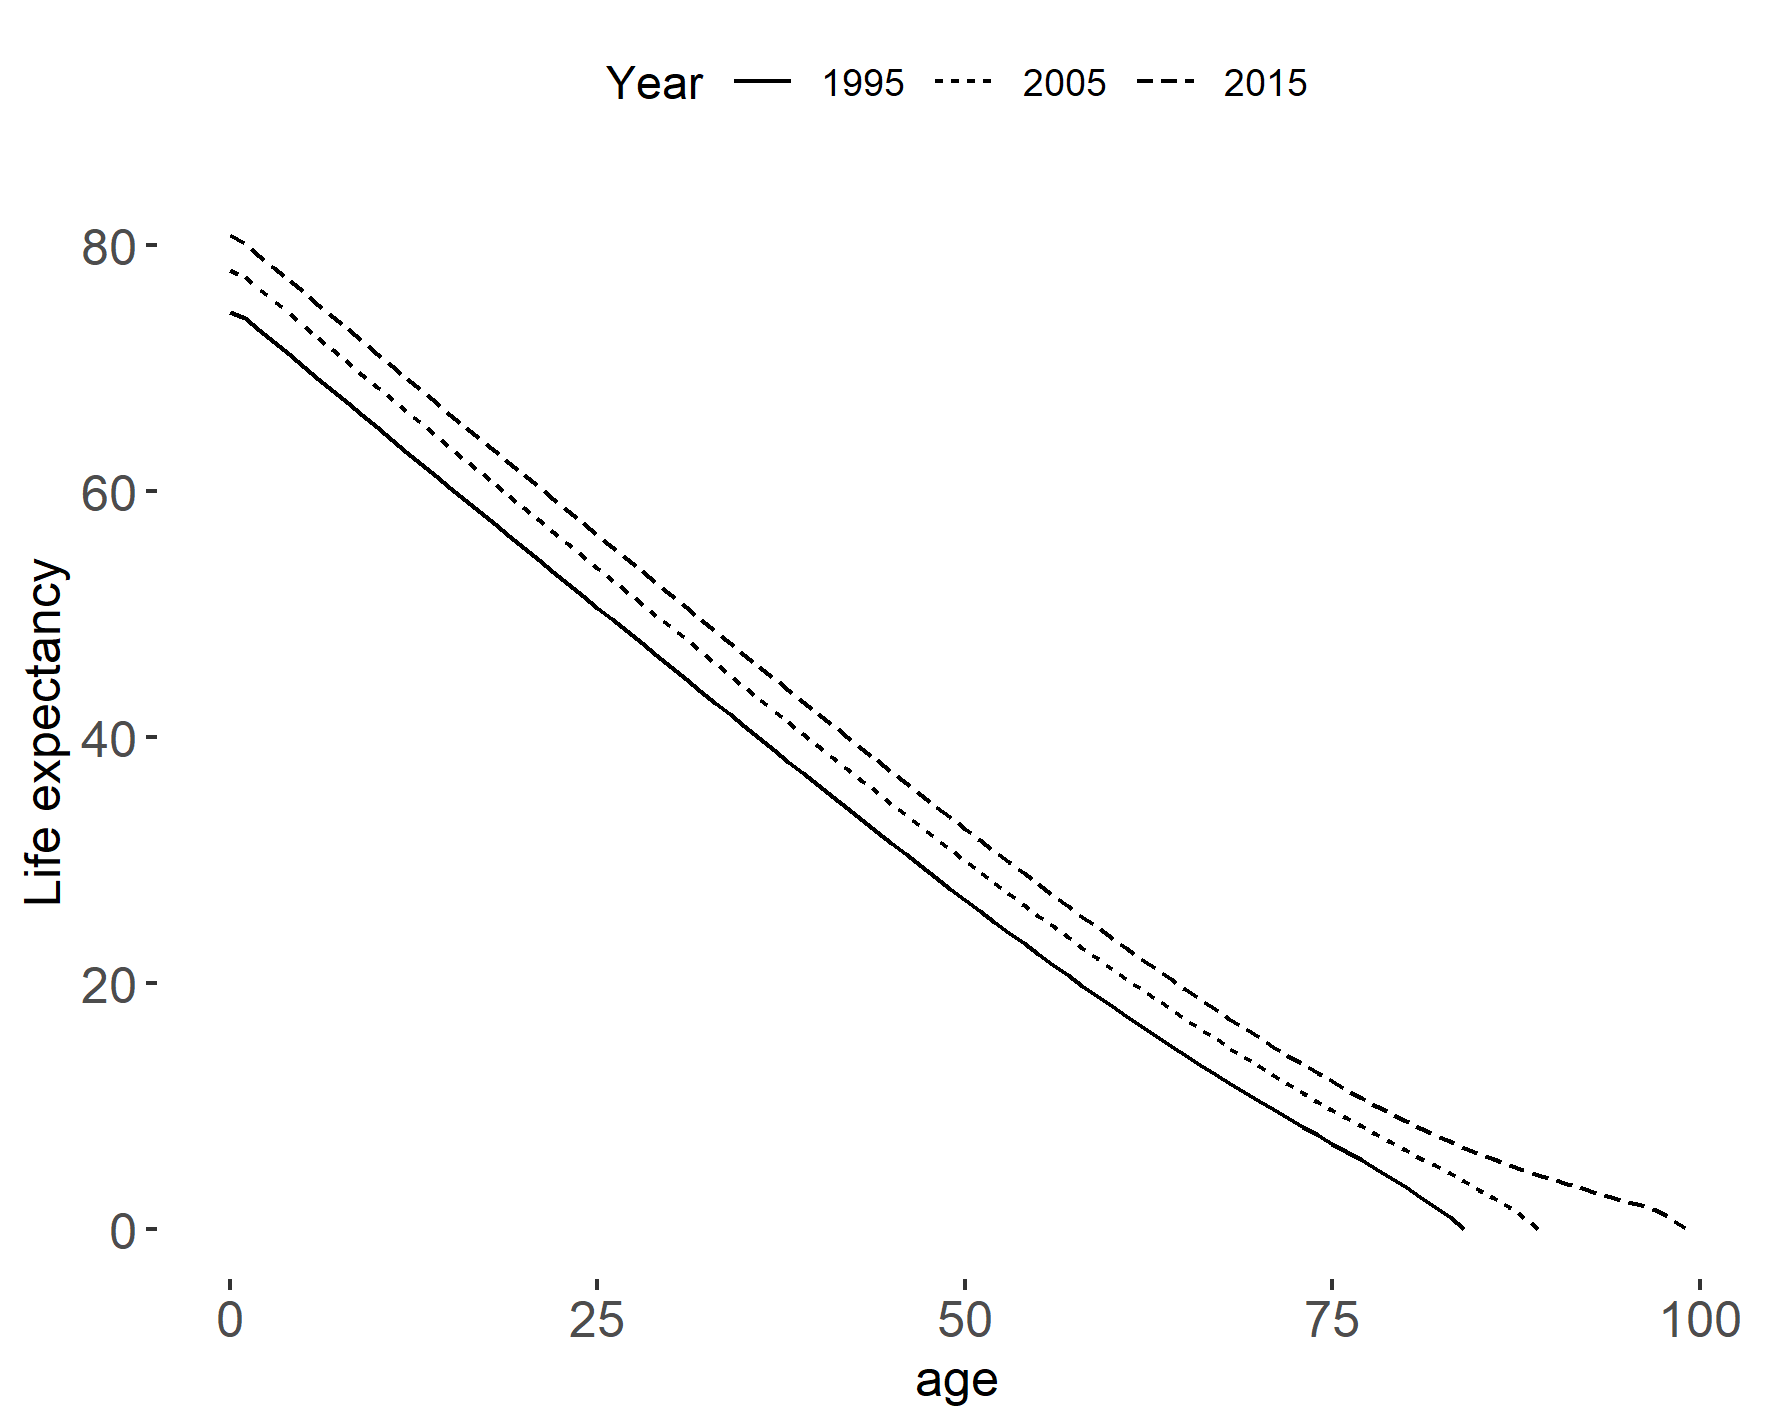 Life expectancy by age in years (left) and survival probabilities (right). Data source: Eurostat. 